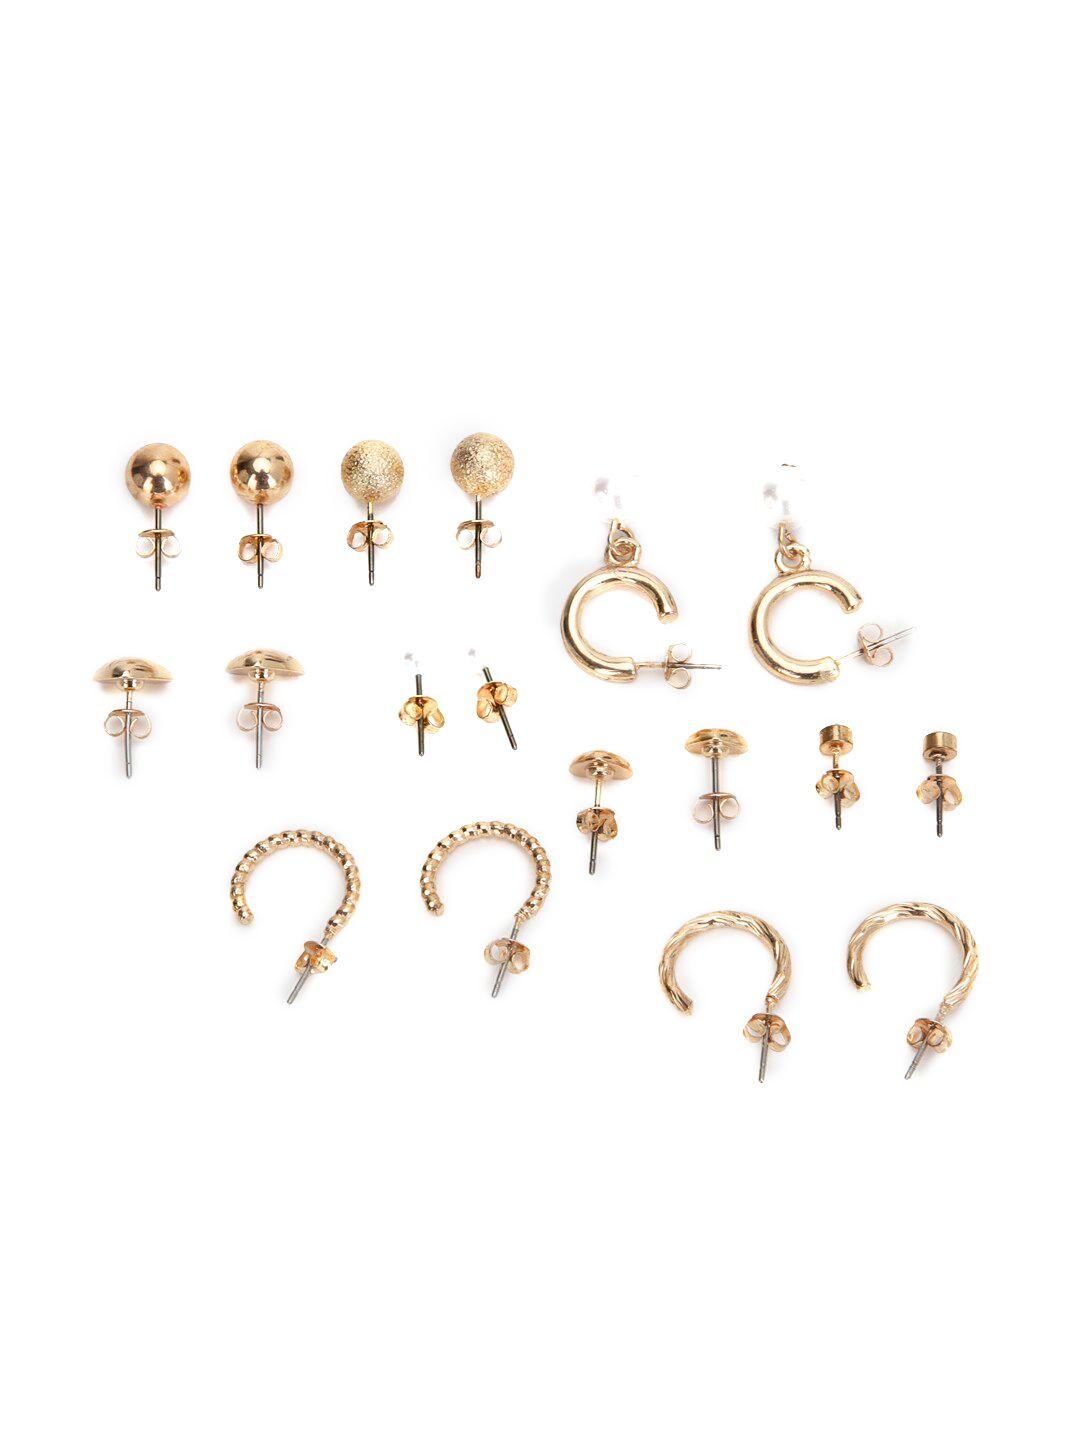 forever-21-women-pack-of-9-gold-toned-contemporary-ear-cuff-earrings